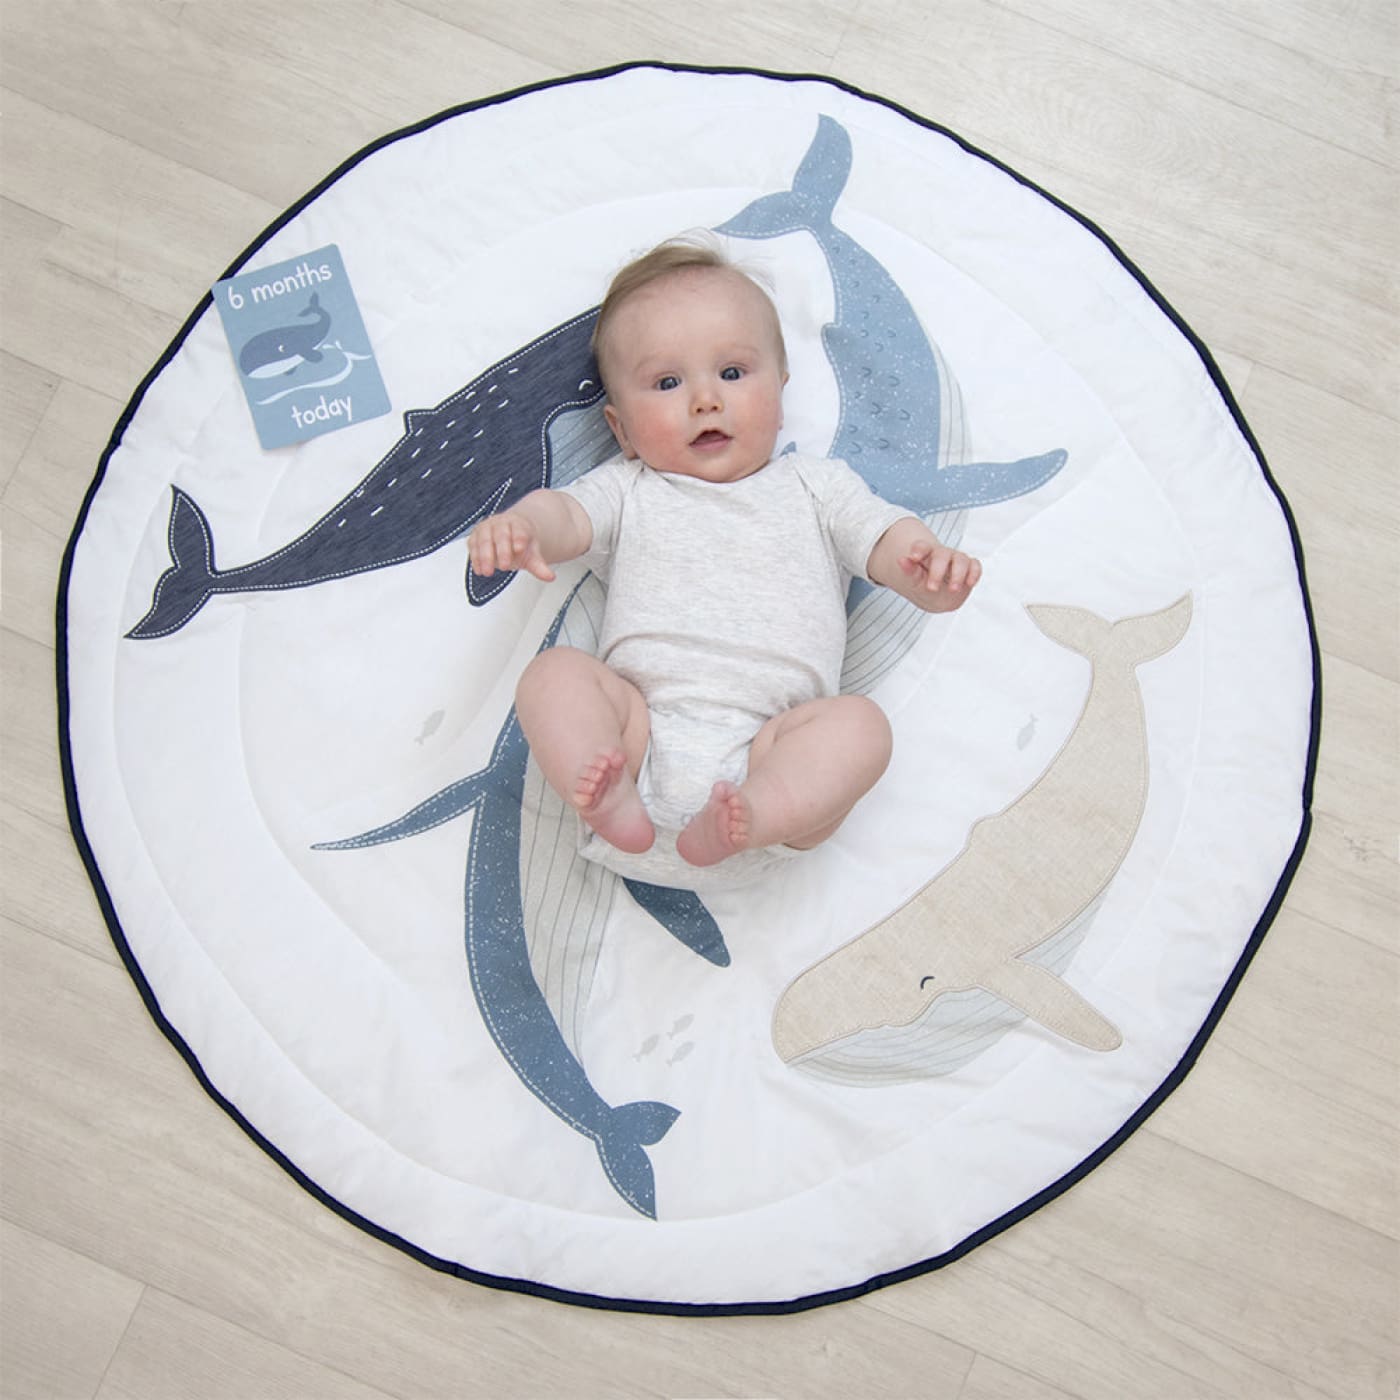 Lolli Living Round play mat with Milestone card - Oceania - Oceania - TOYS & PLAY - PLAY MATS/GYMS